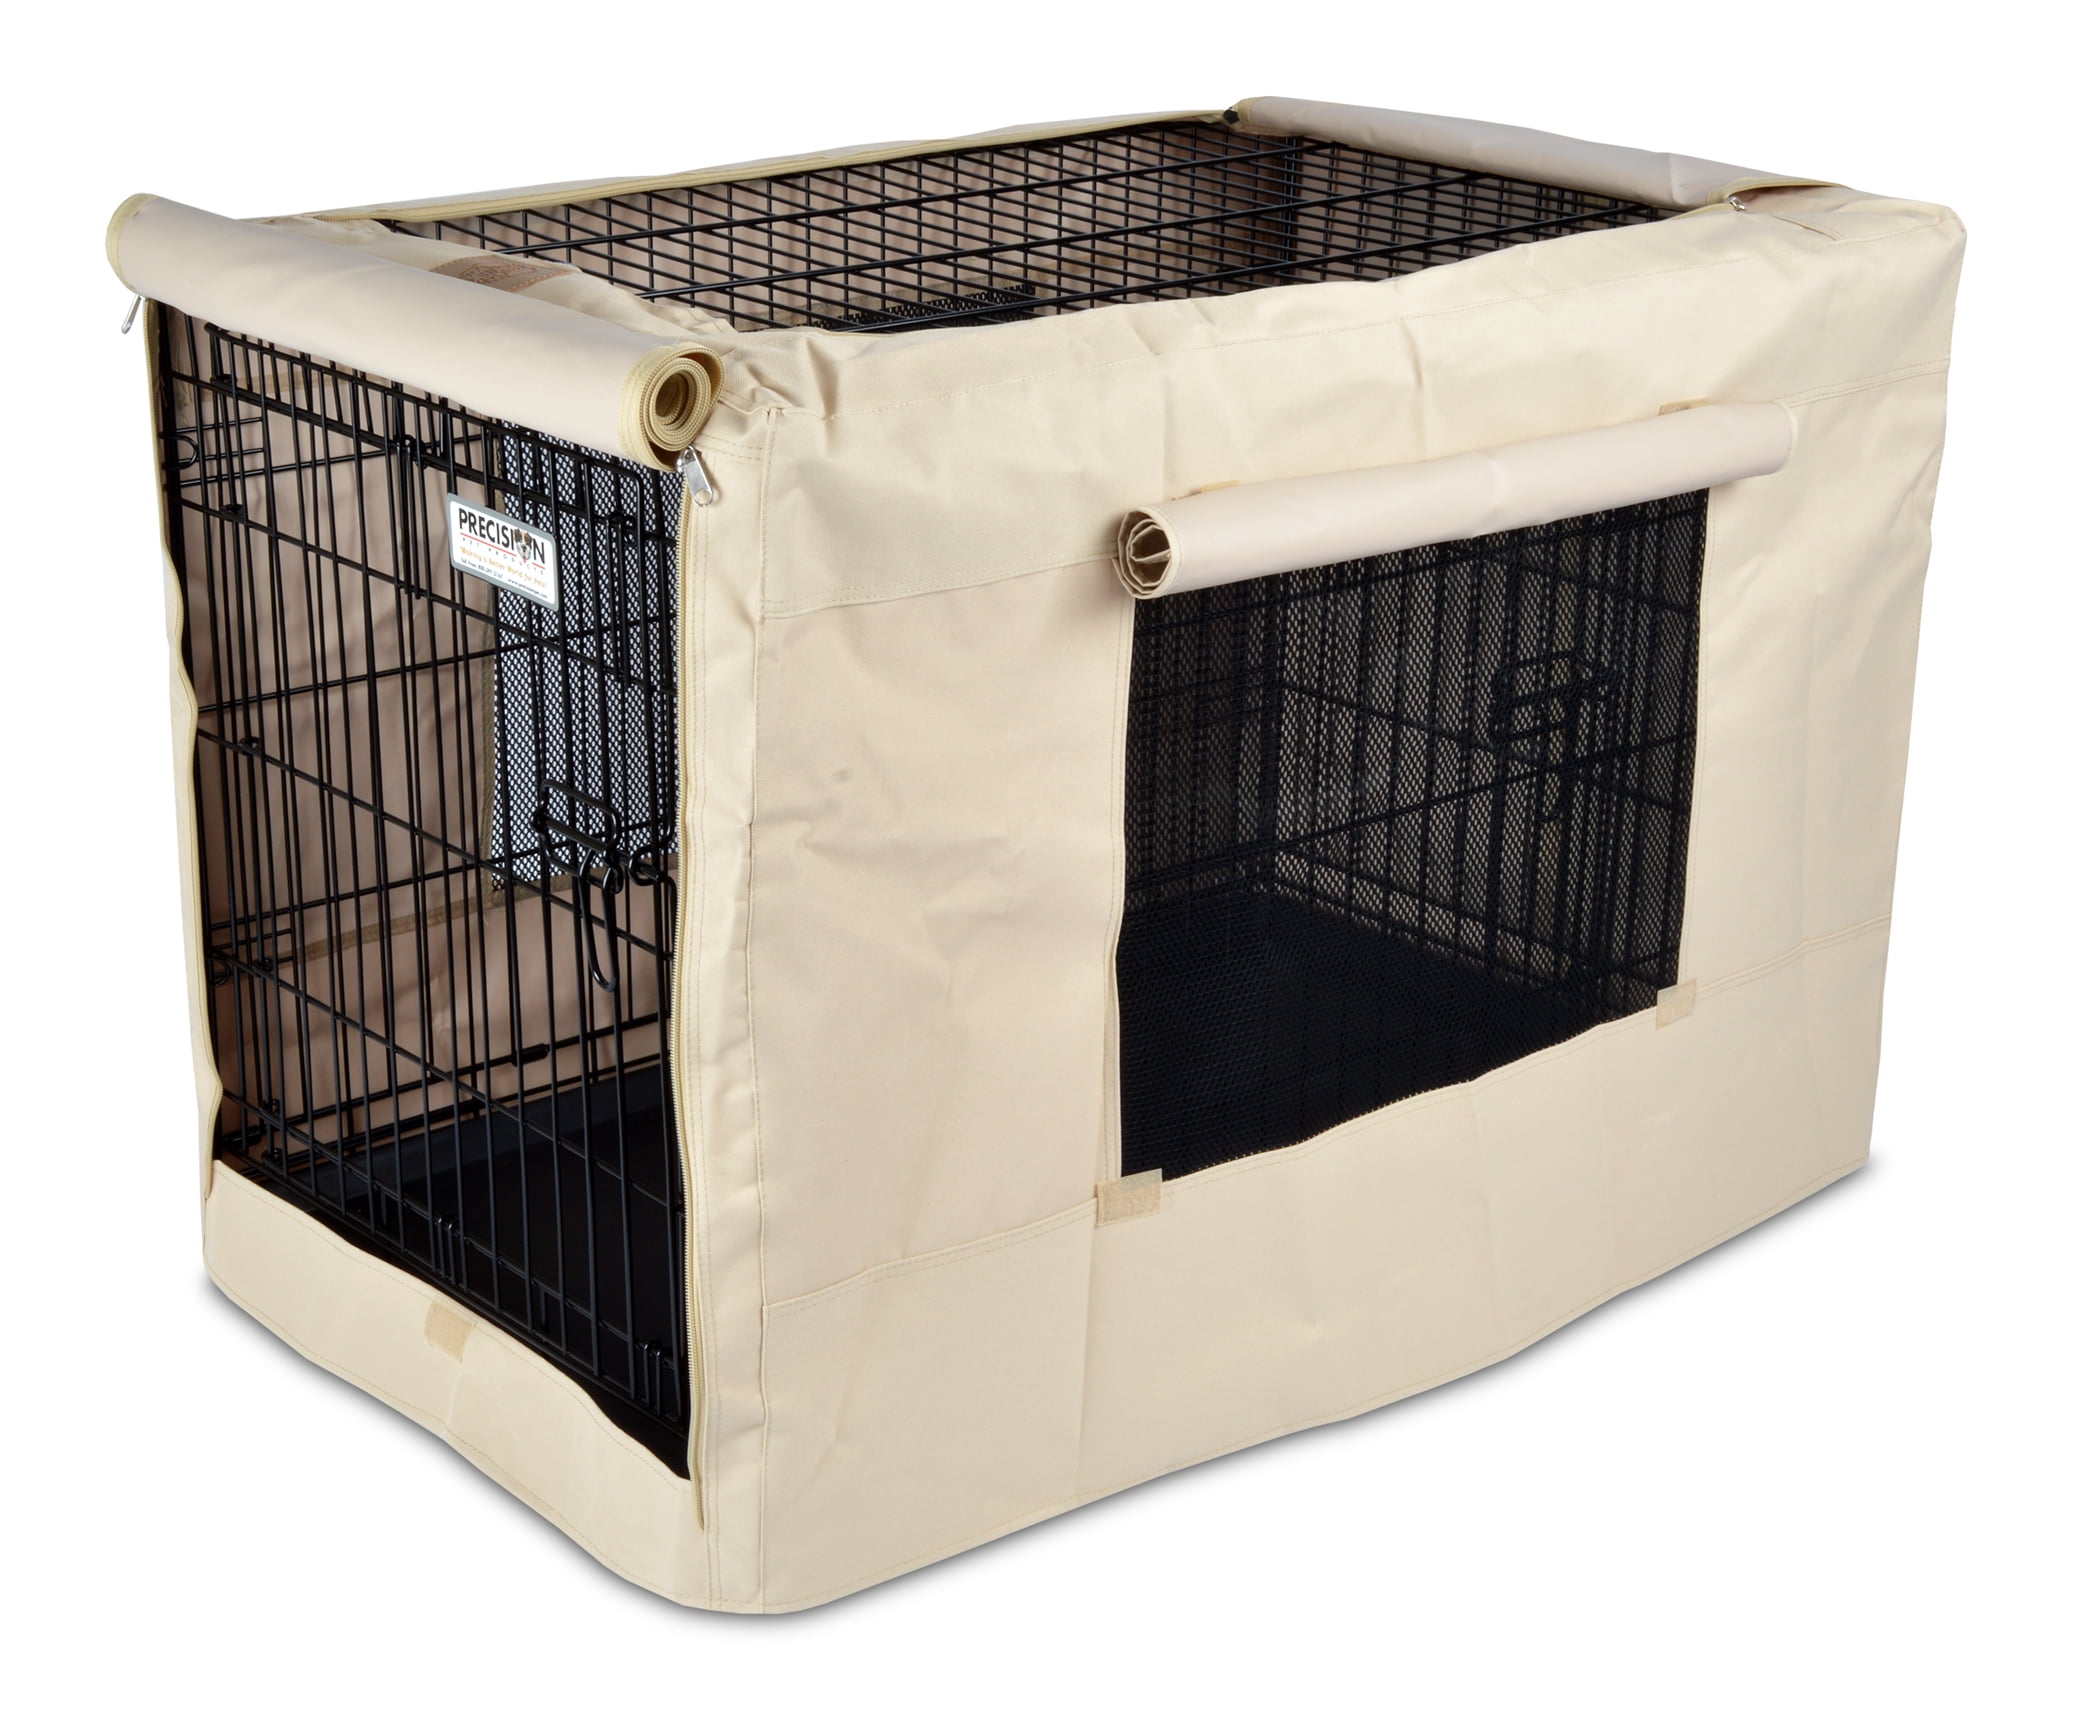 TUYUU Dog Crate Cover Pet Crate Cover with Double Door and Breathable Mesh M: 31x20x21 in, Y01 Durable Dog Kennel Cover for Medium and Large Dogs